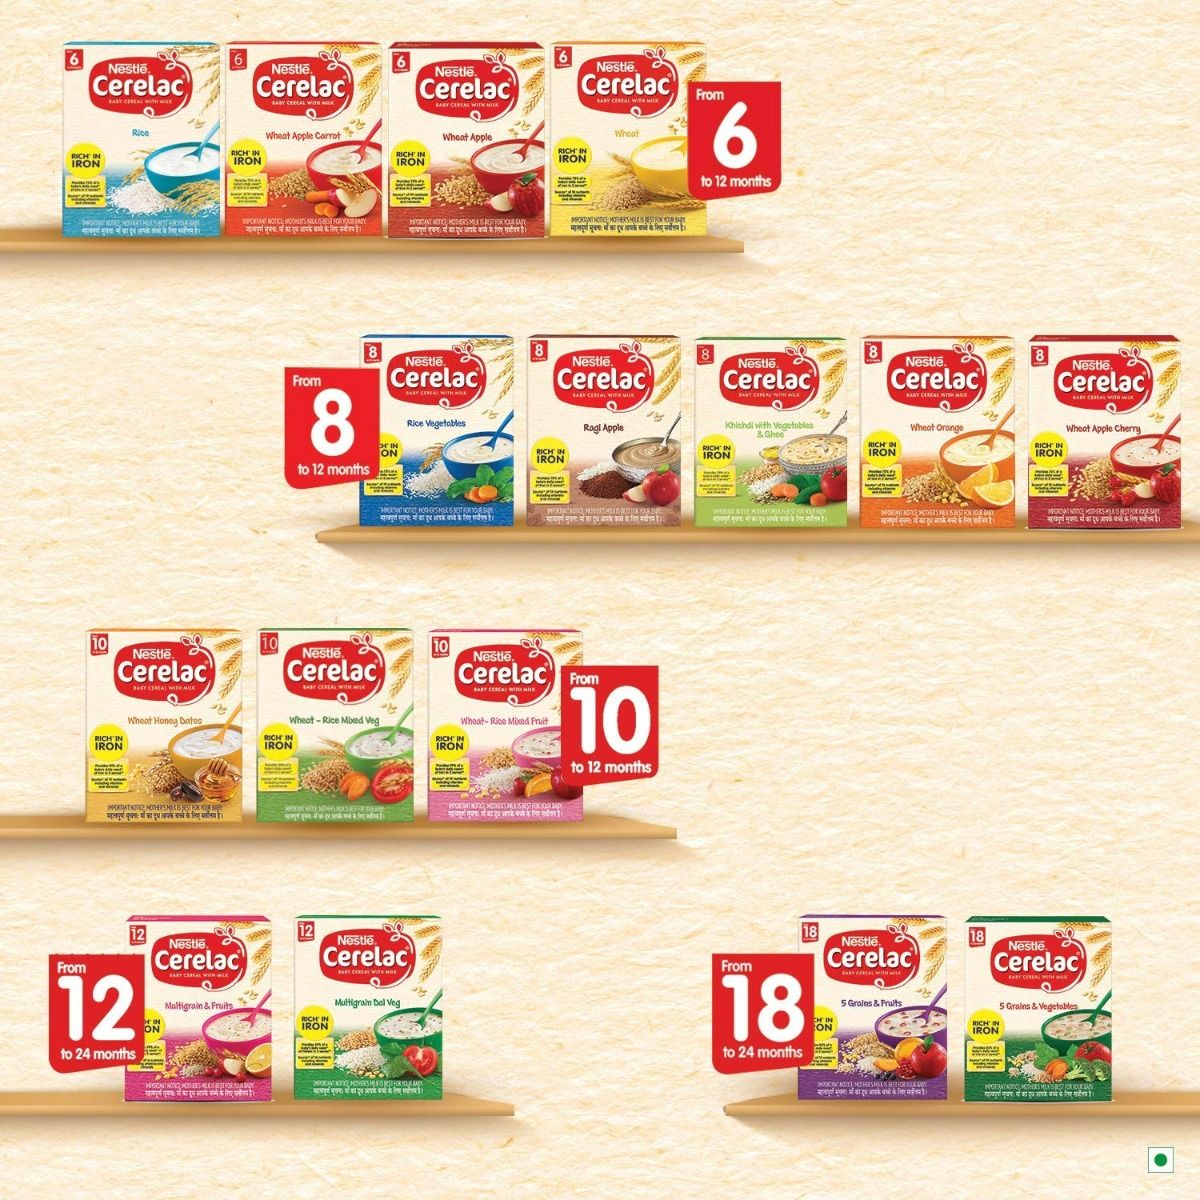 Nestle Cerelac Rice Vegetables Baby Cereal, 8 to 12 Months, 300 gm Refill Pack, Pack of 1 